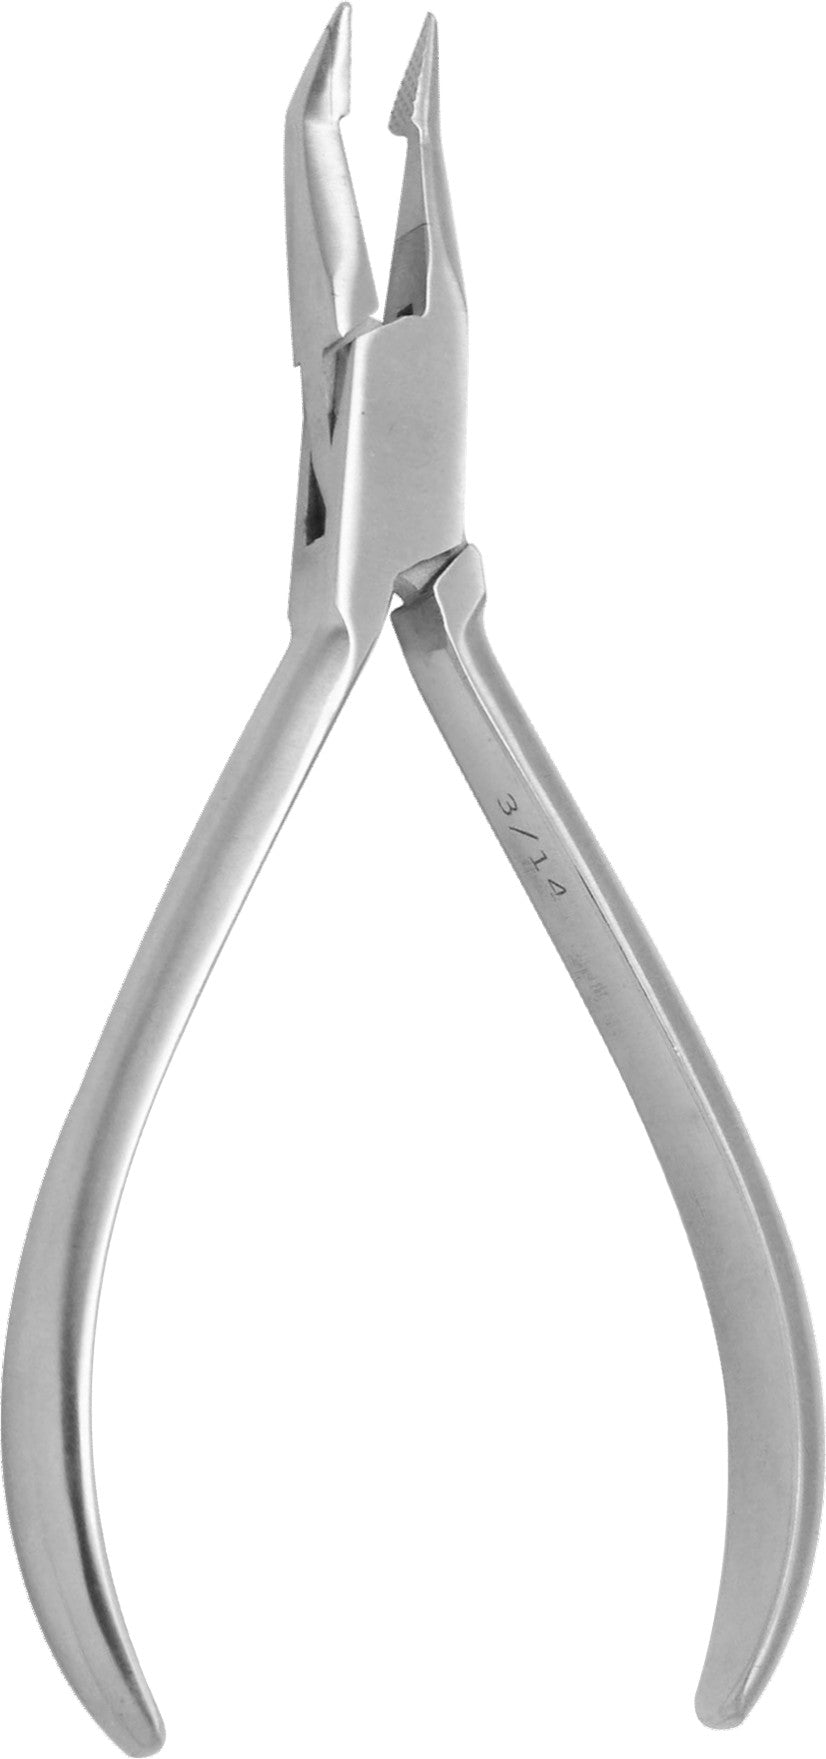 Weingart Utility Pliers with Inserted Tool Steel Tip